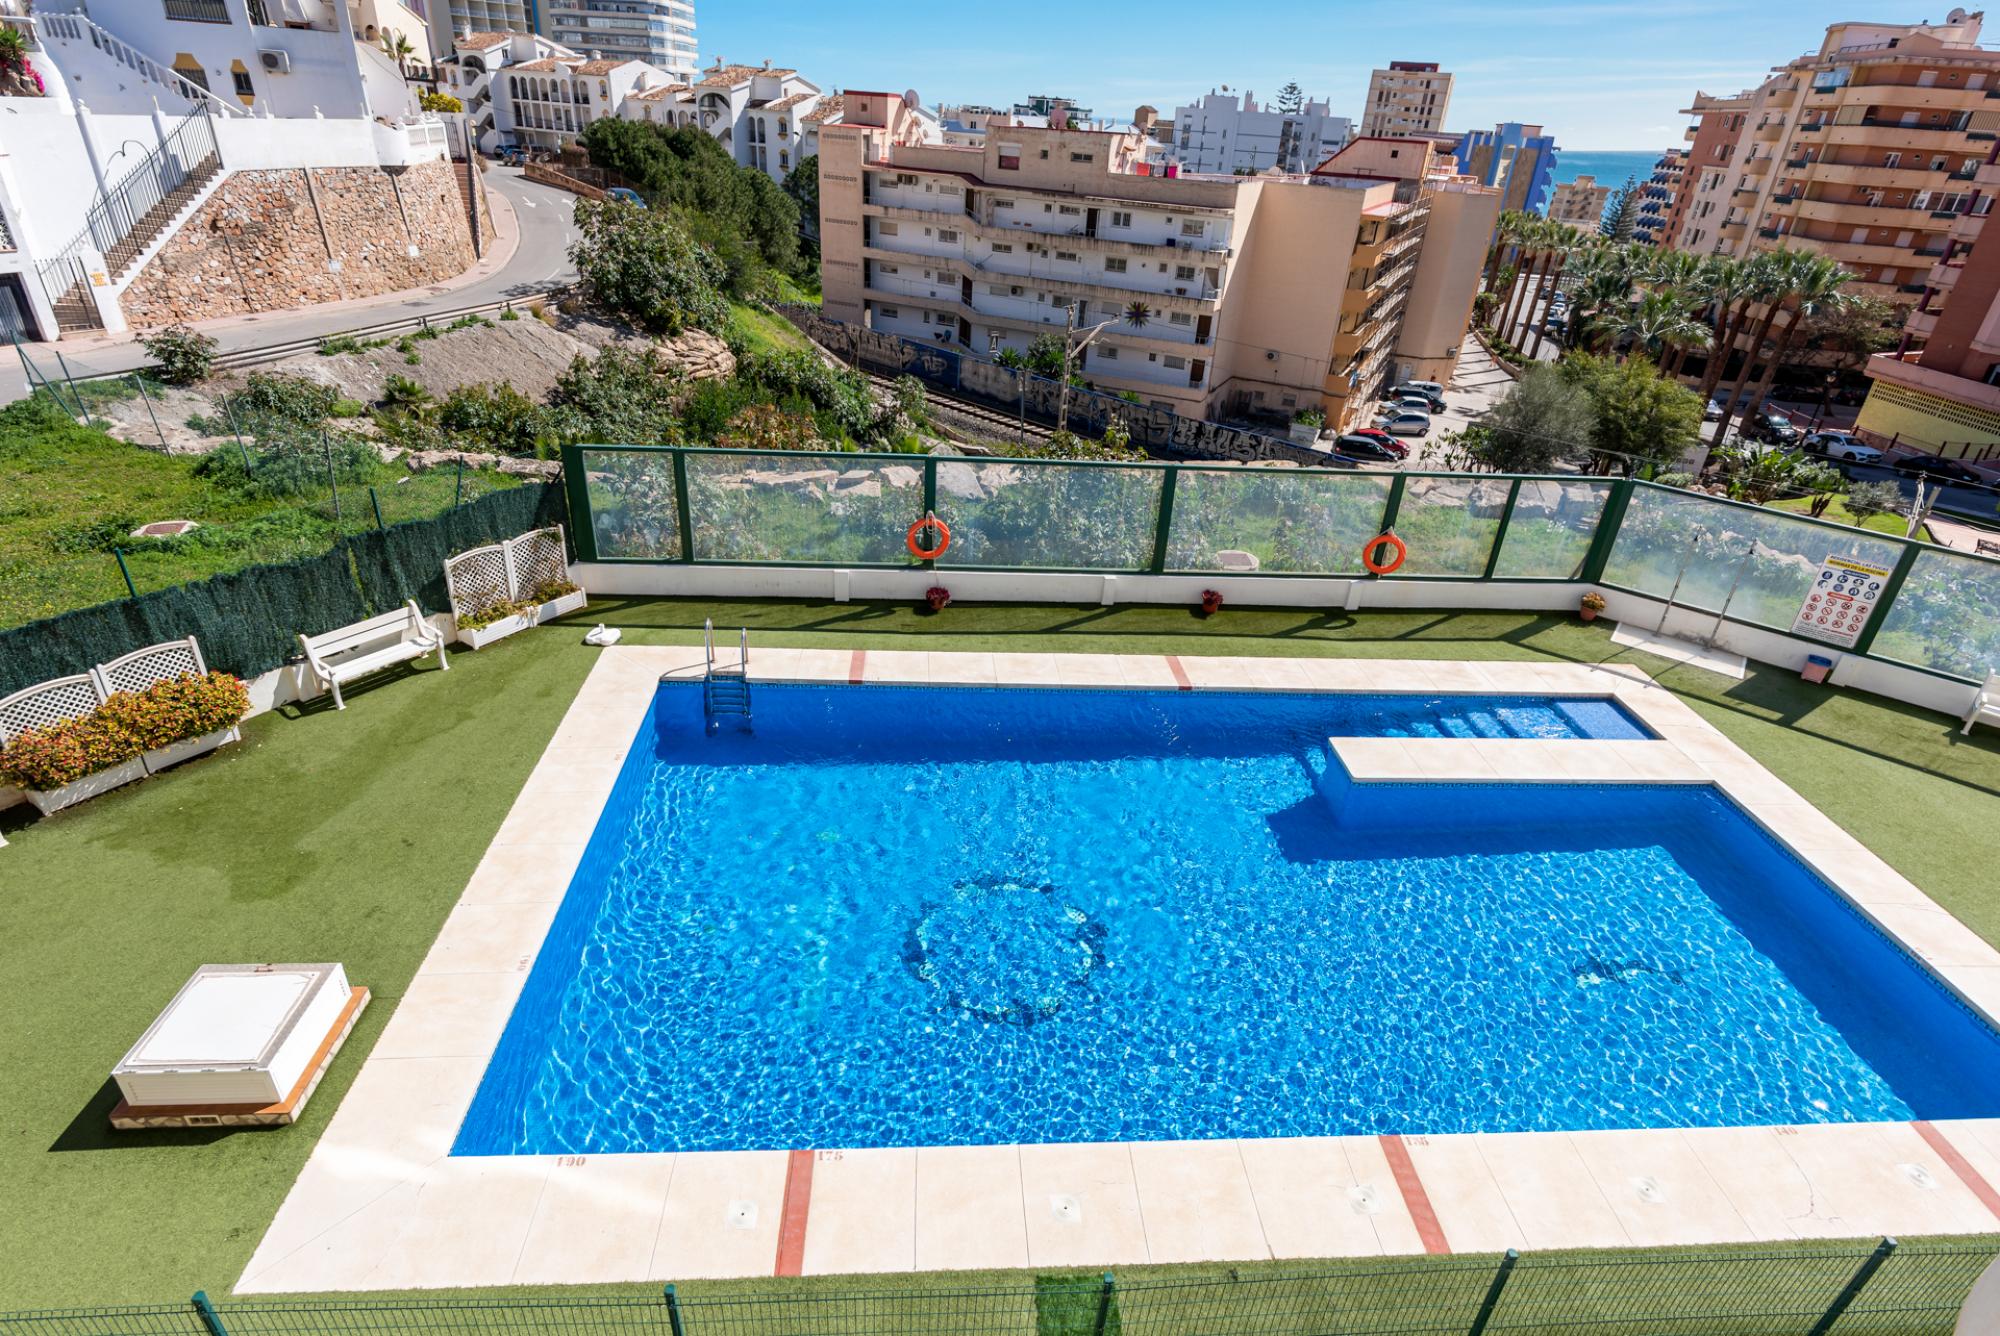 Property Image 1 - Charming Torreblanca apartment with pool Ref 152